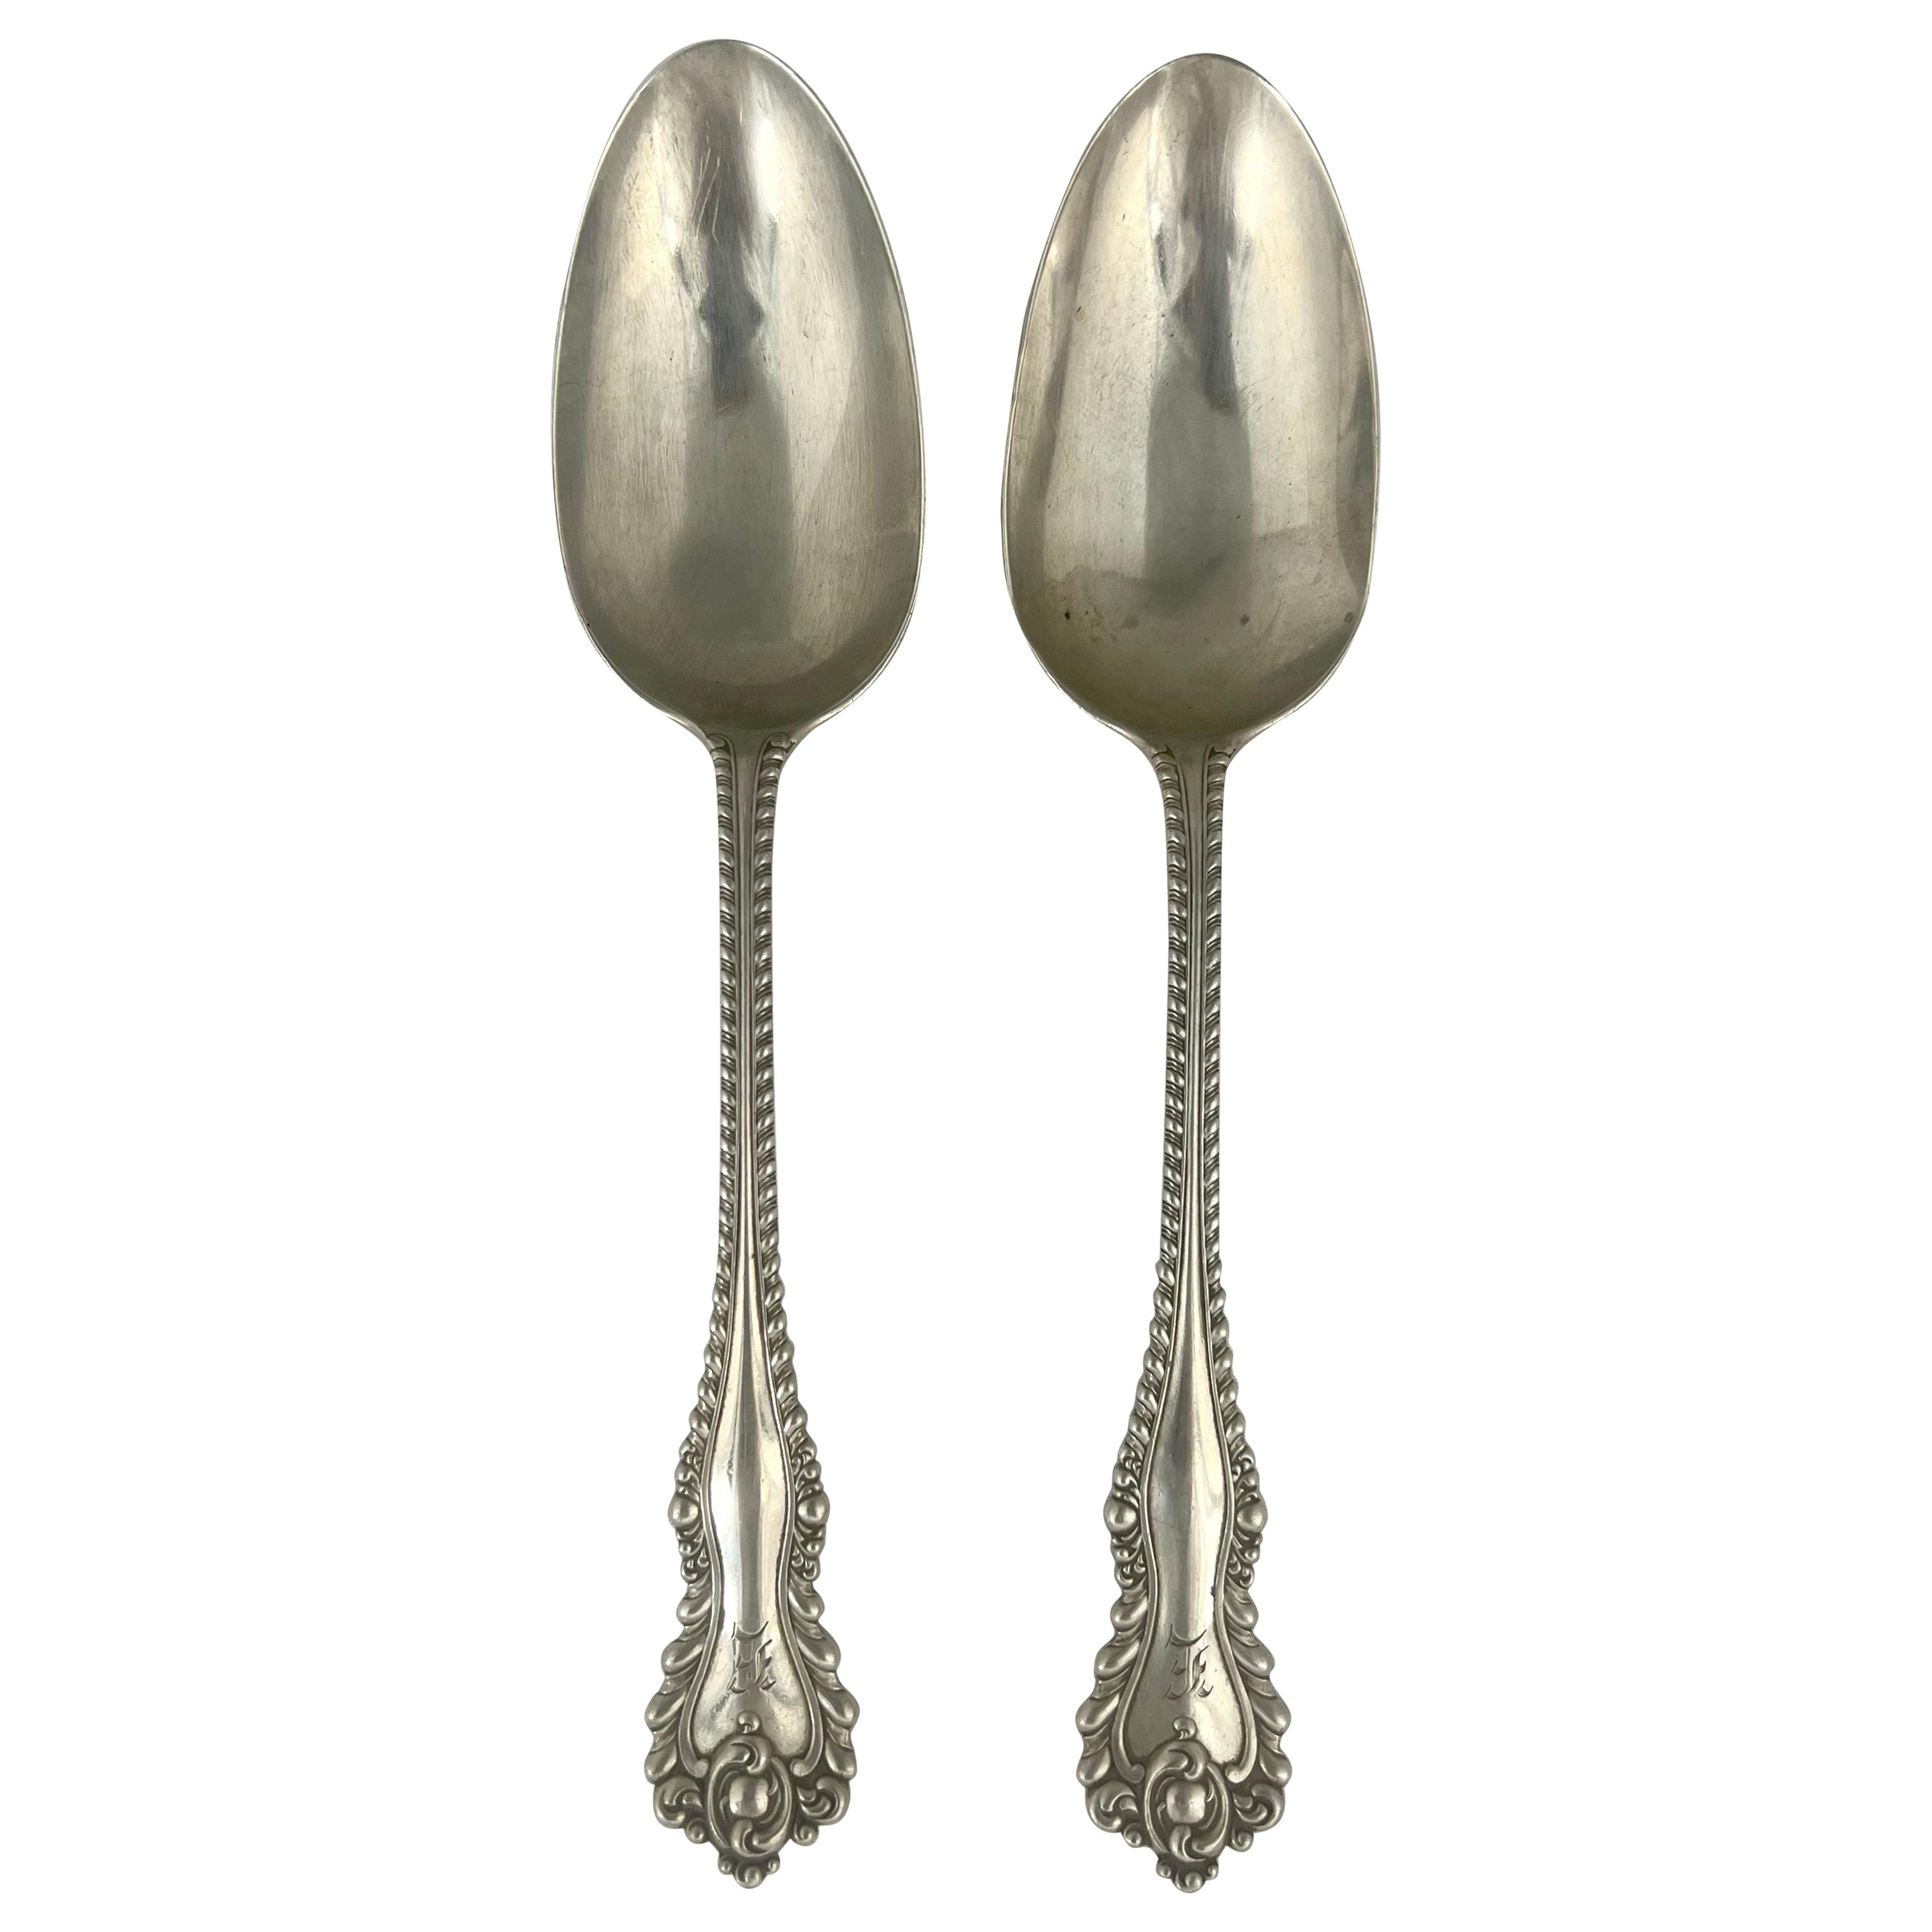 Pair of Sterling Silver Spoons Monogrammed "E"